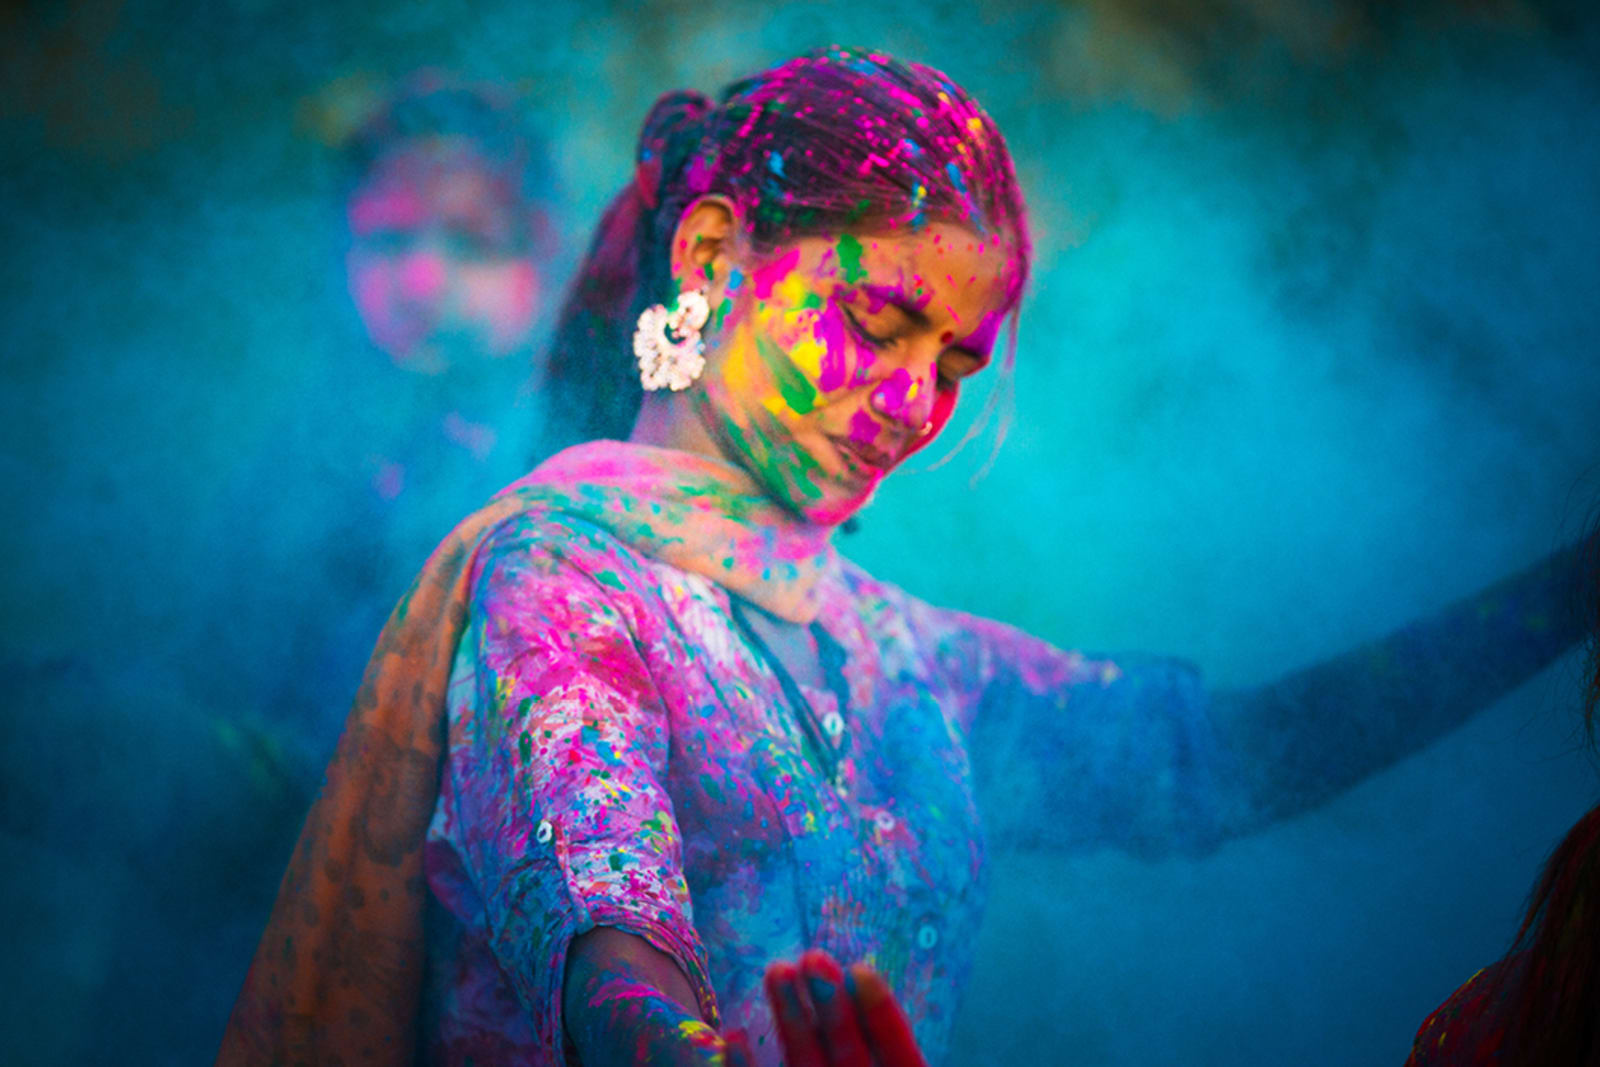 Woman covered in colourful pigments during Holi festival in India